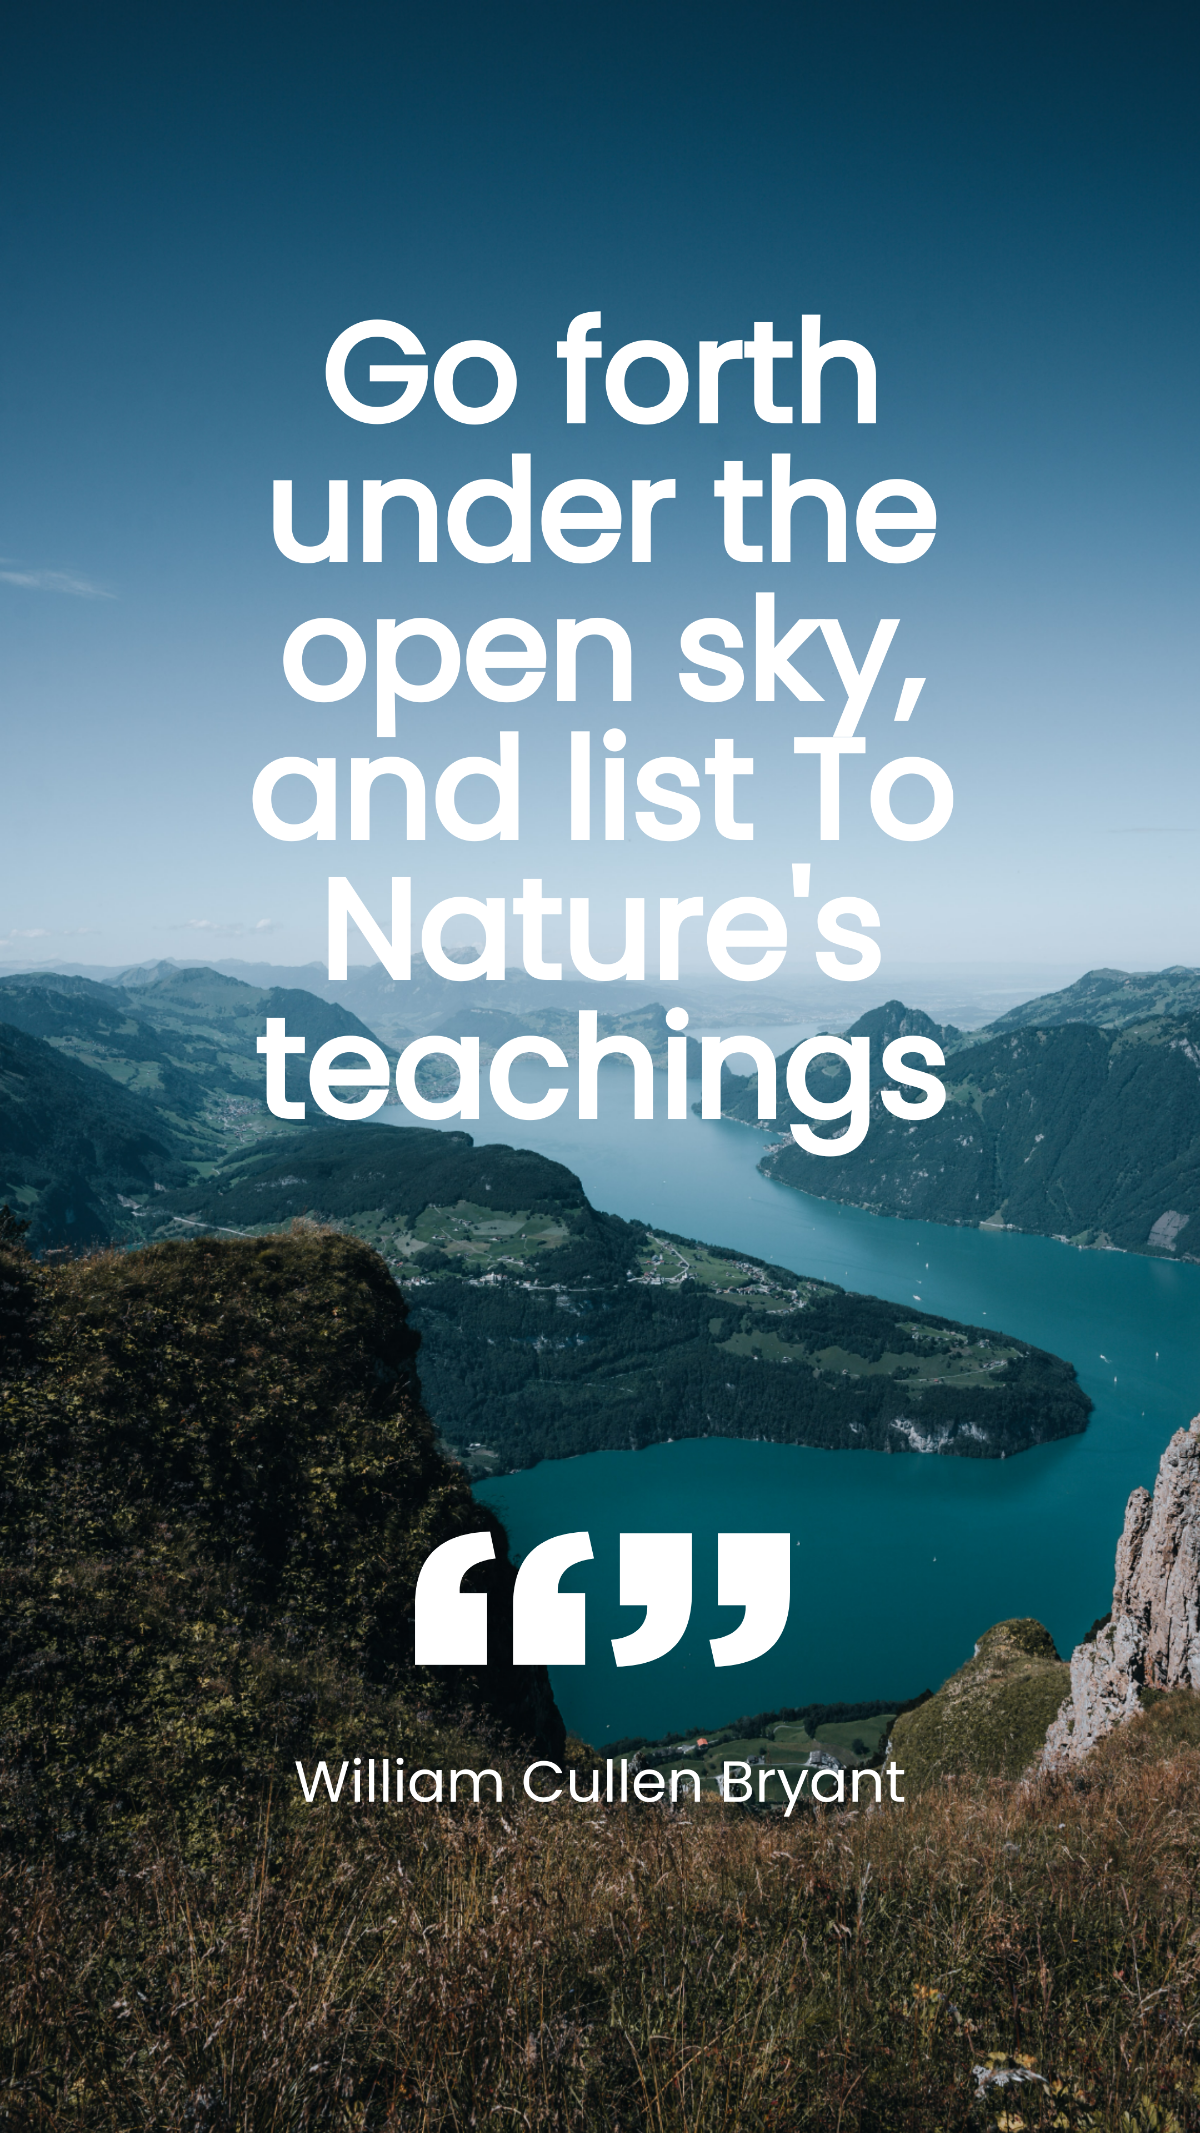 William Cullen Bryant - Go forth under the open sky, and list To Nature's teachings.